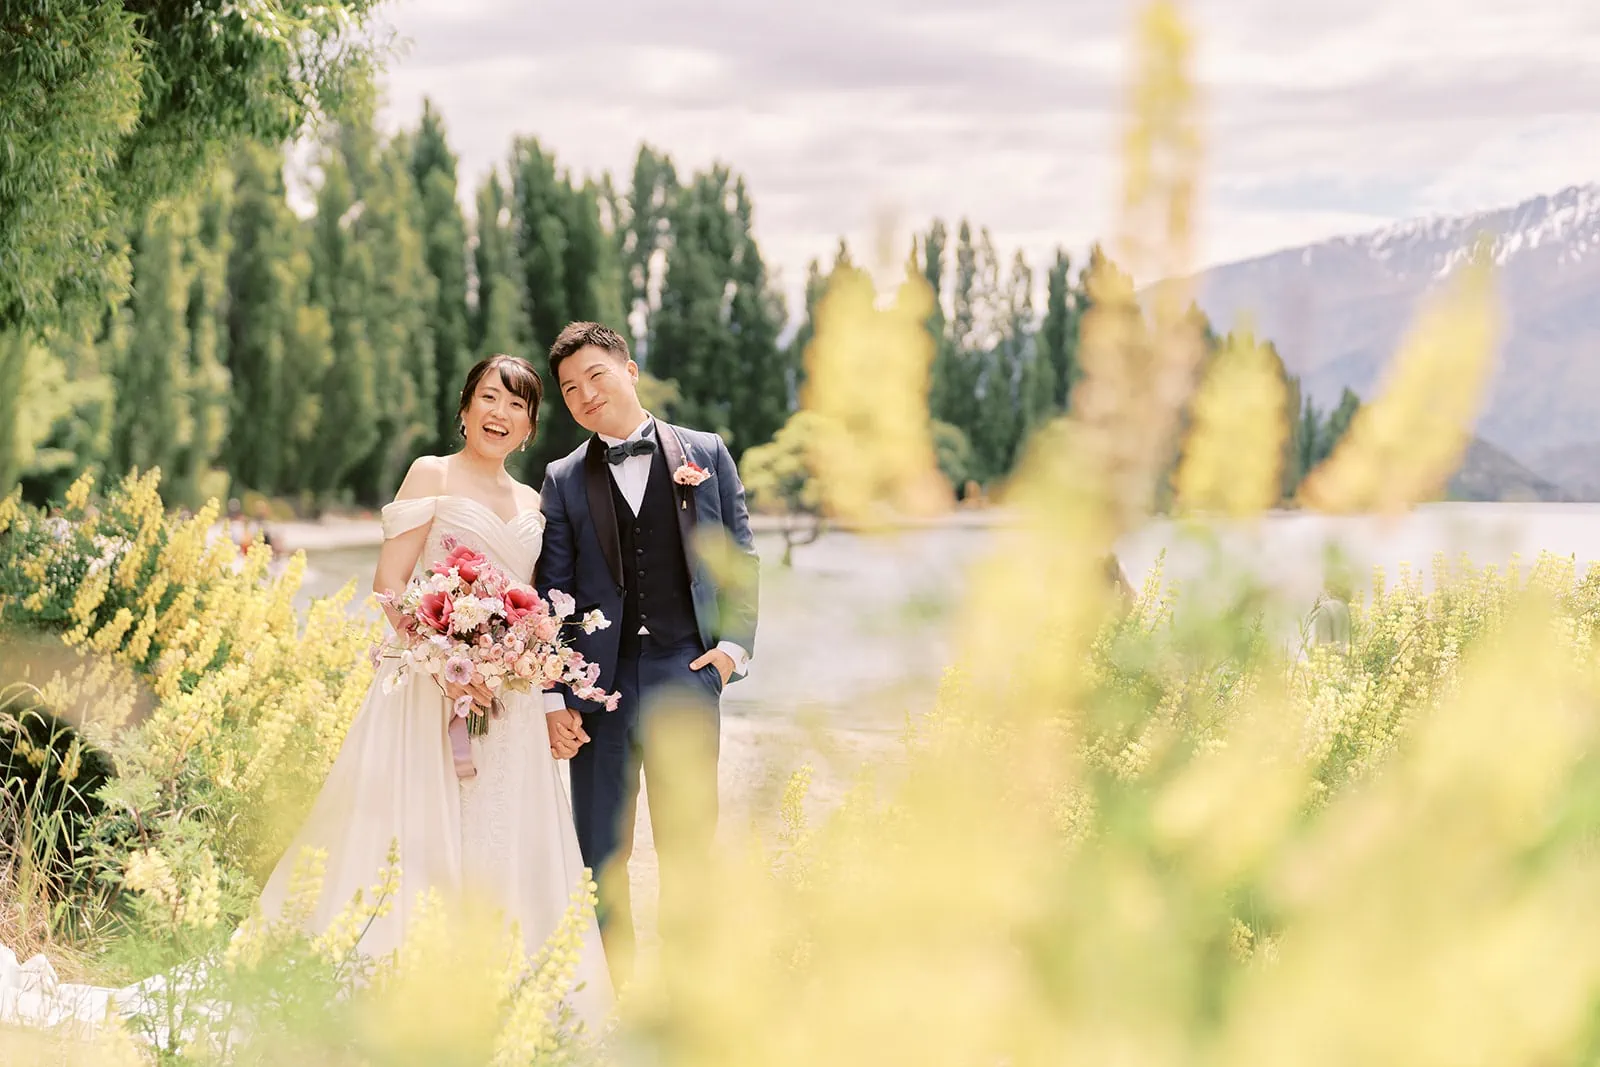 Queenstown Elopement Heli Wedding Photographer クイーンズタウン結婚式 | A pre-wedding photoshoot of a bride and groom in front of a lake in New Zealand.